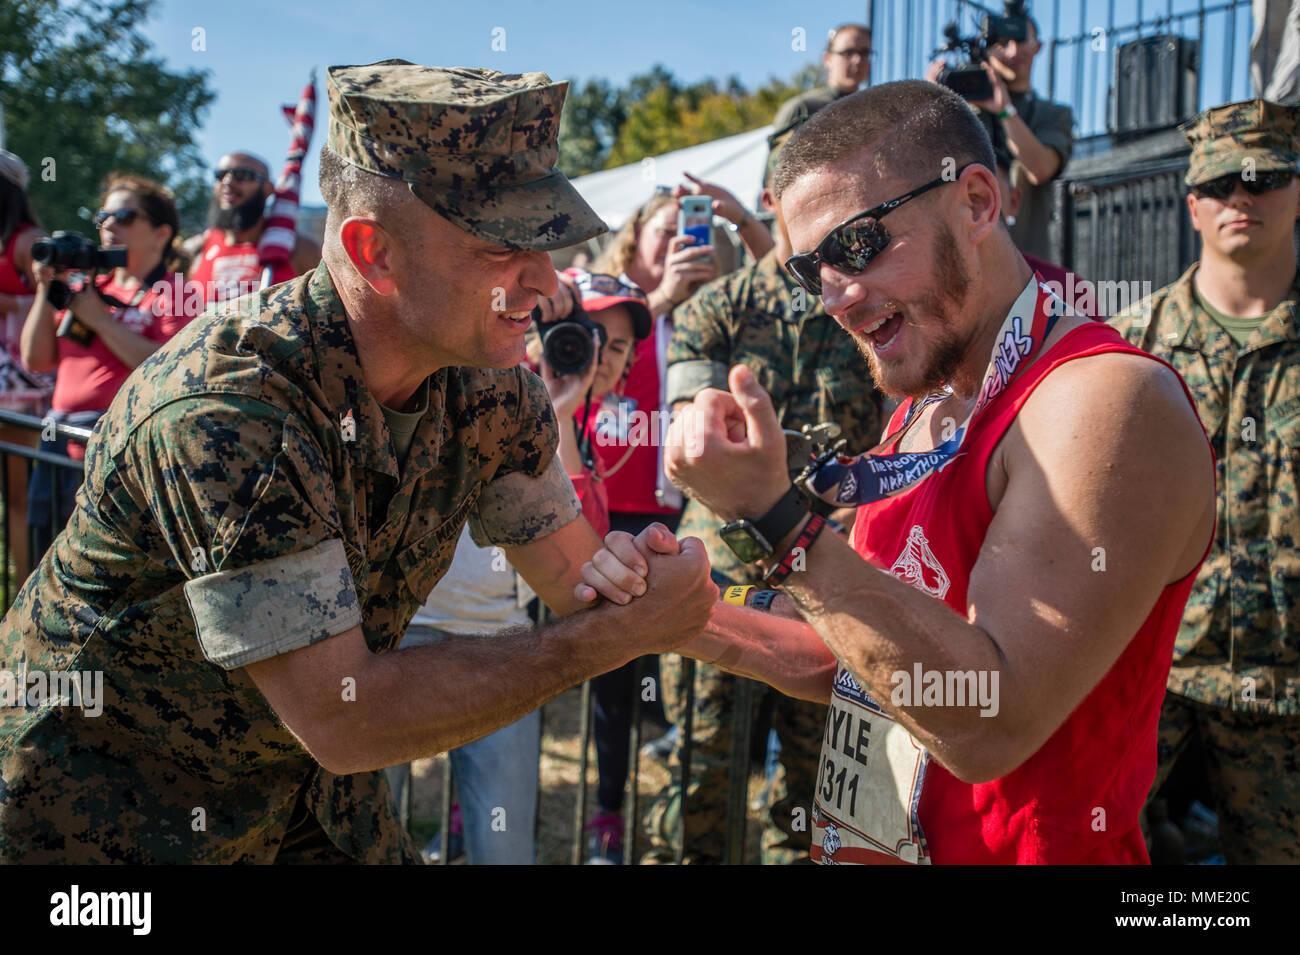 U.S. Marine Corps Col. Joseph Murray, left, commanding officer, Marine Corps Base Quantico, presents a  finisher medal to retired U.S. Marine Corps Cpl. Kyle Carpenter, Medal of Honor recipient, after crossing the finish line of the 42nd Marine Corps Marathon, Arlington, Va., Oct. 22, 2017. Also known as 'The People's Marathon,' the 26.2 mile race drew roughly 30,000 participants to promote physical fitness, generate goodwill in the community, and showcase the organizational skills of the Marine Corps. (U.S. Marine Corps photo by Lance Cpl. Yasmin D. Perez) Stock Photo